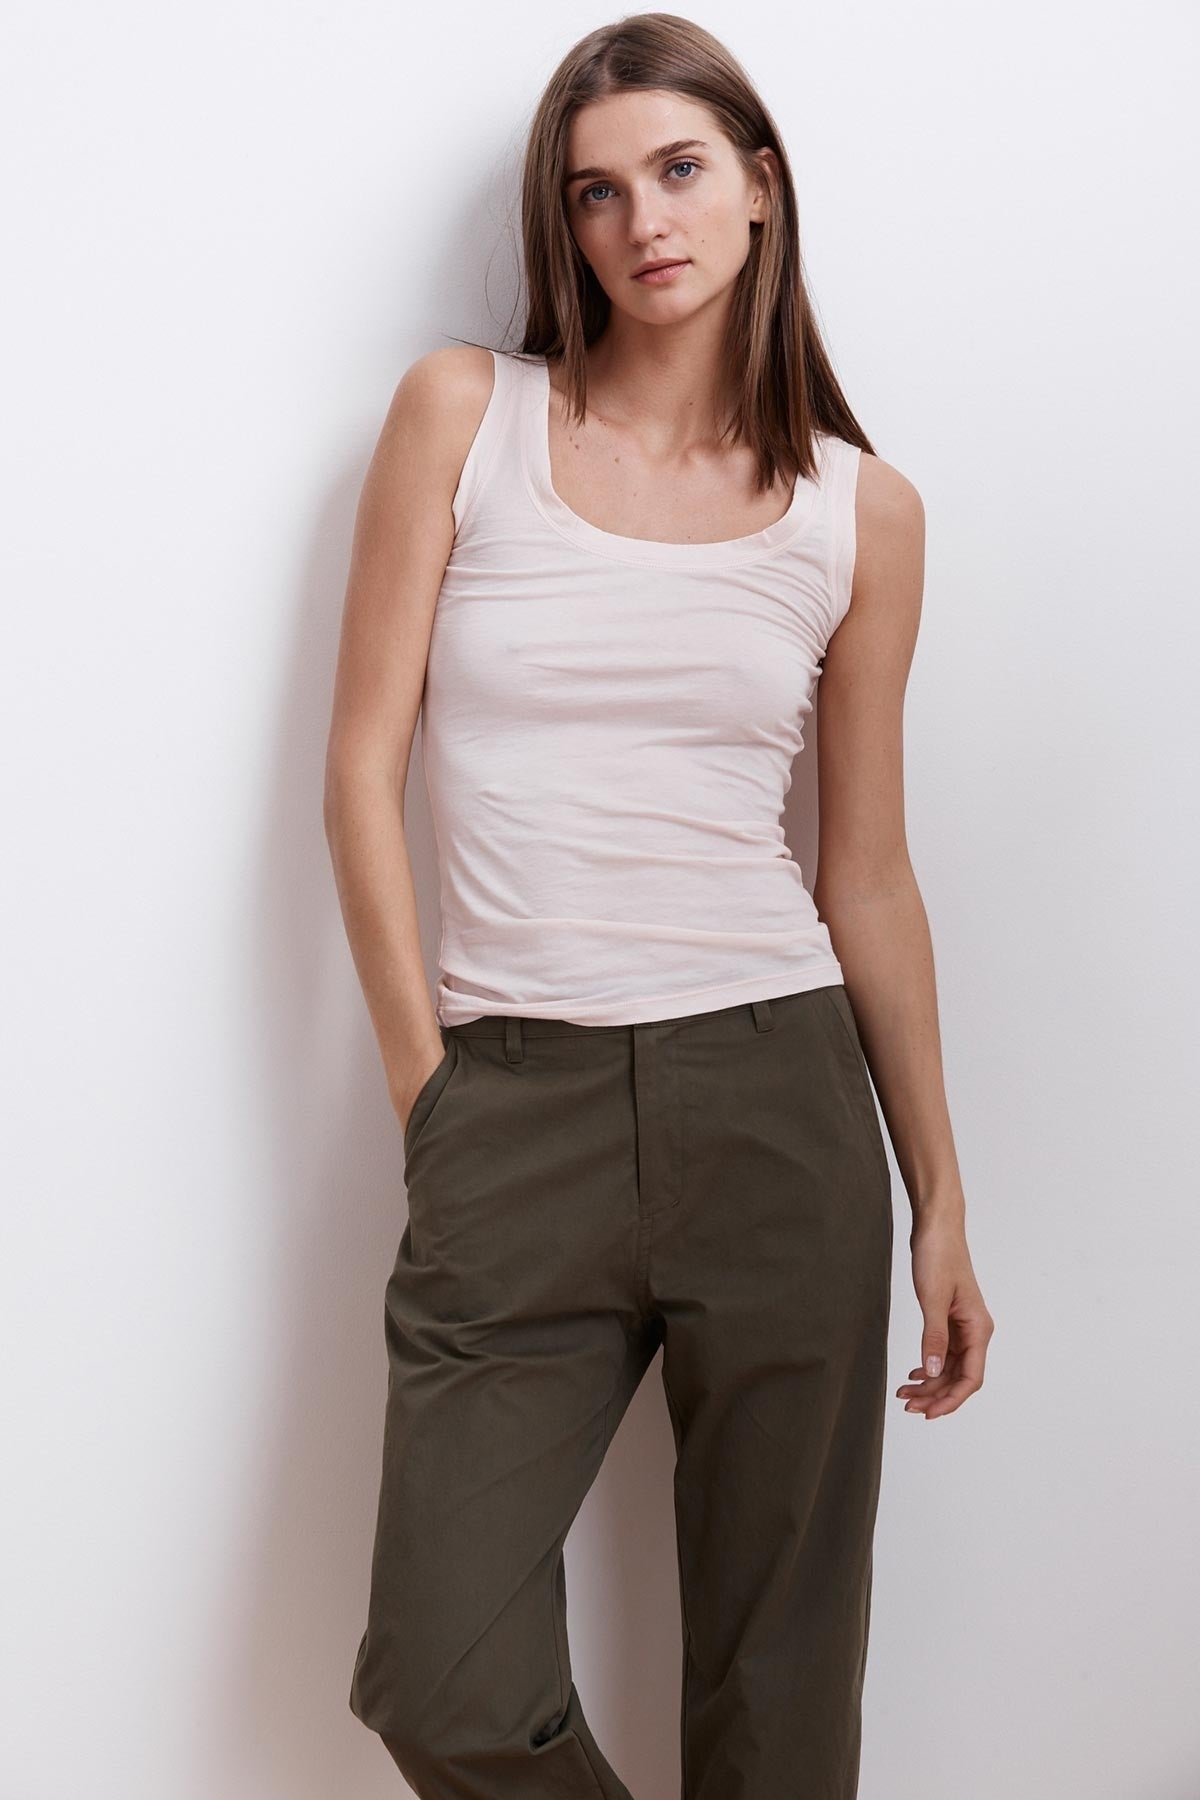 A woman wearing a Velvet by Graham & Spencer MOSSY GAUZY WHISPER FITTED TANK tank top.-23854475444417